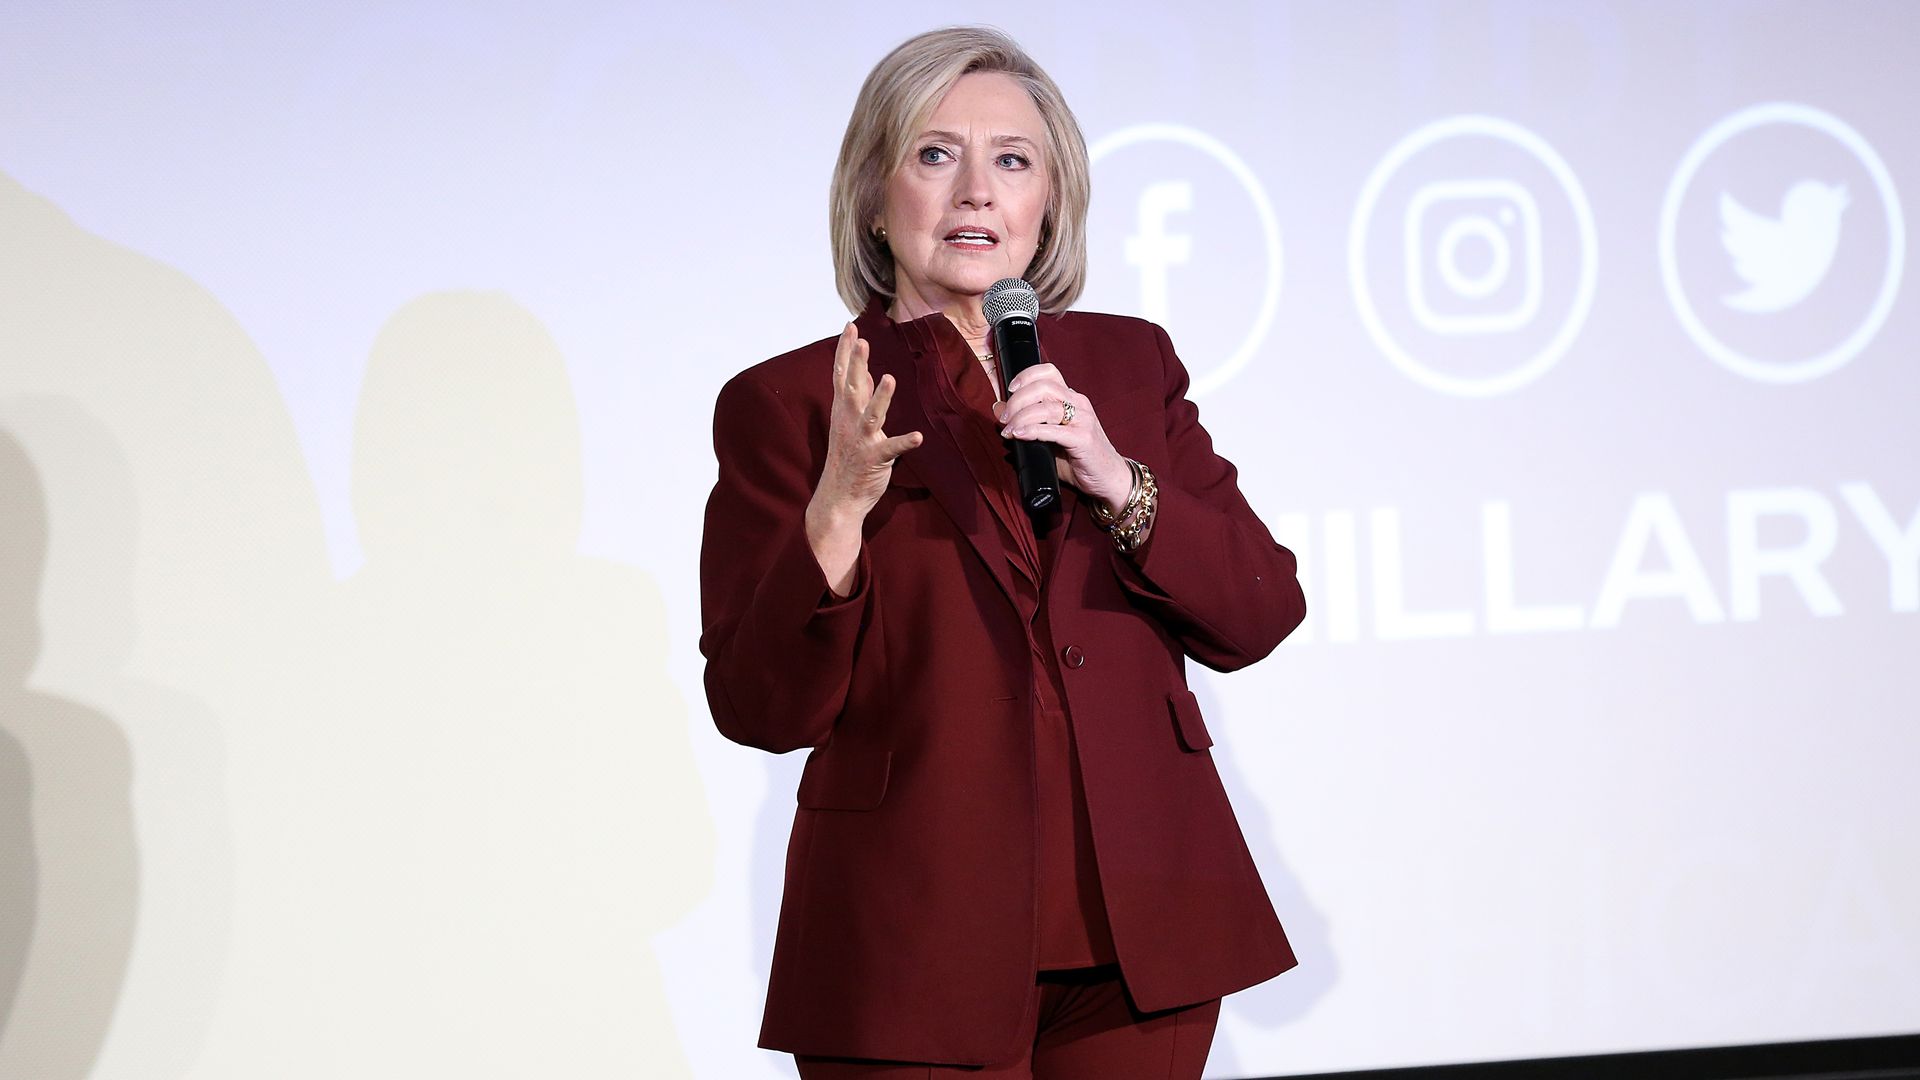  Hillary Rodham Clinton speaks onstage during Hulu's "Hillary" NYC Premiere on March 04, 2020 in New York City.